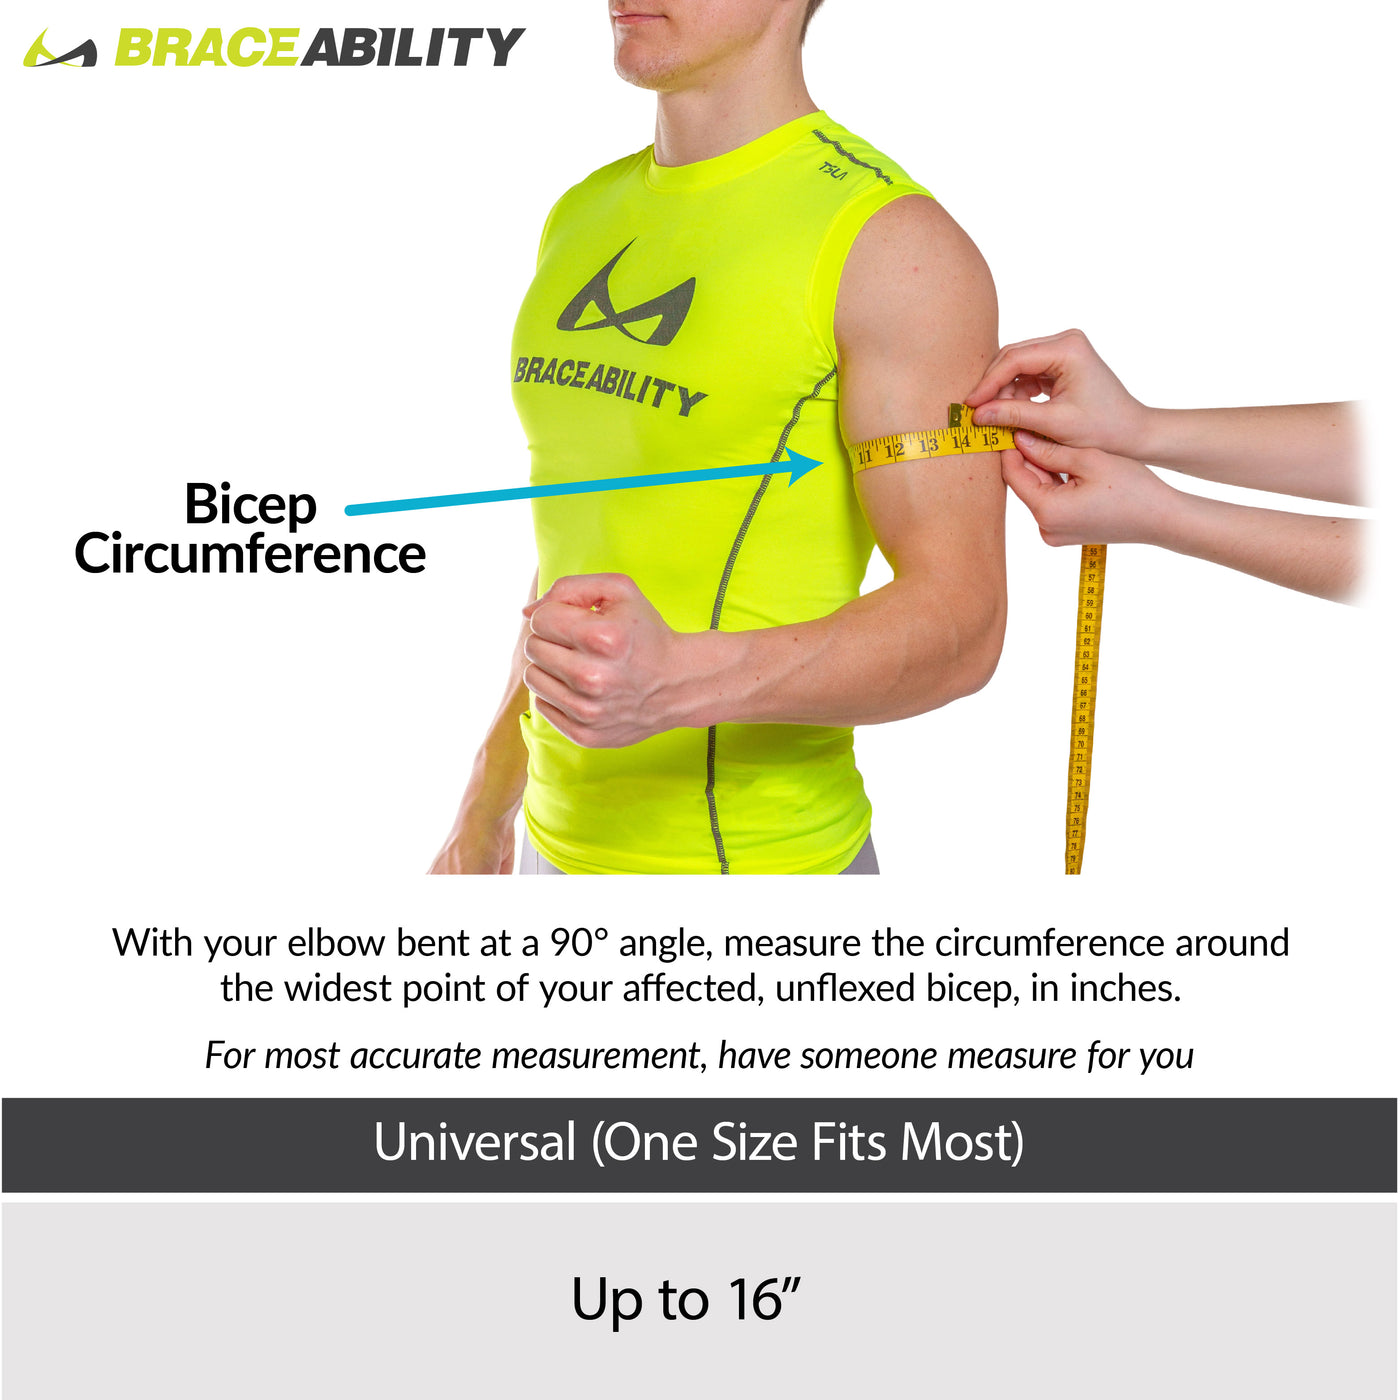 the sizing for the cubital tunnel brace comes in one size that fits bicep circumferences up to 16 inches